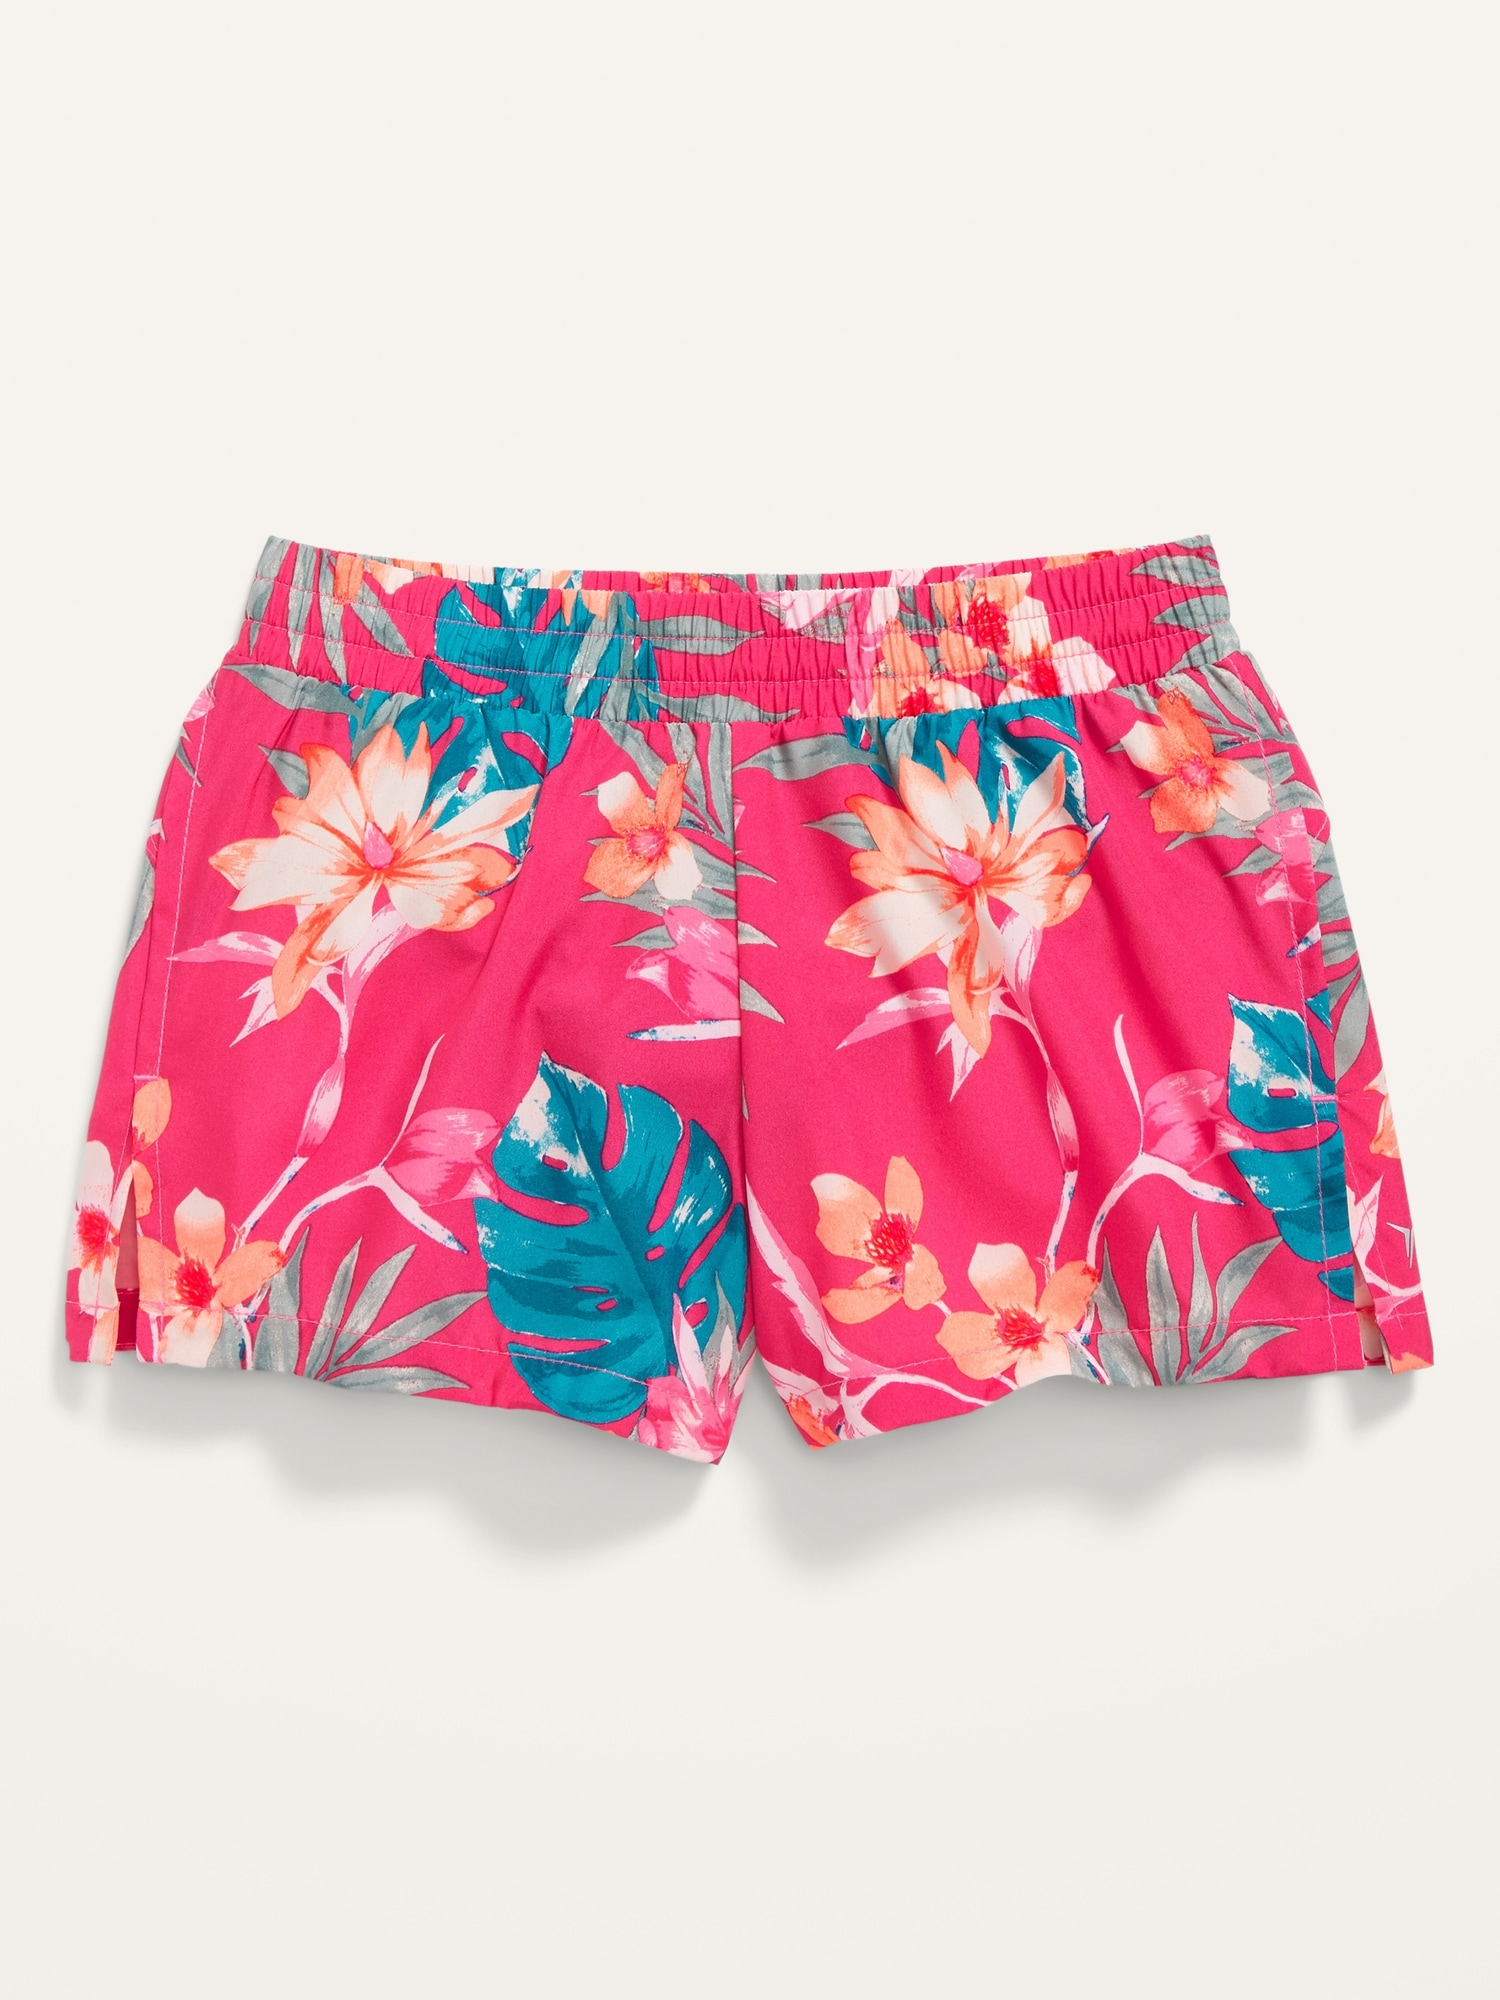 Go-Dry Cool Run Shorts for Girls